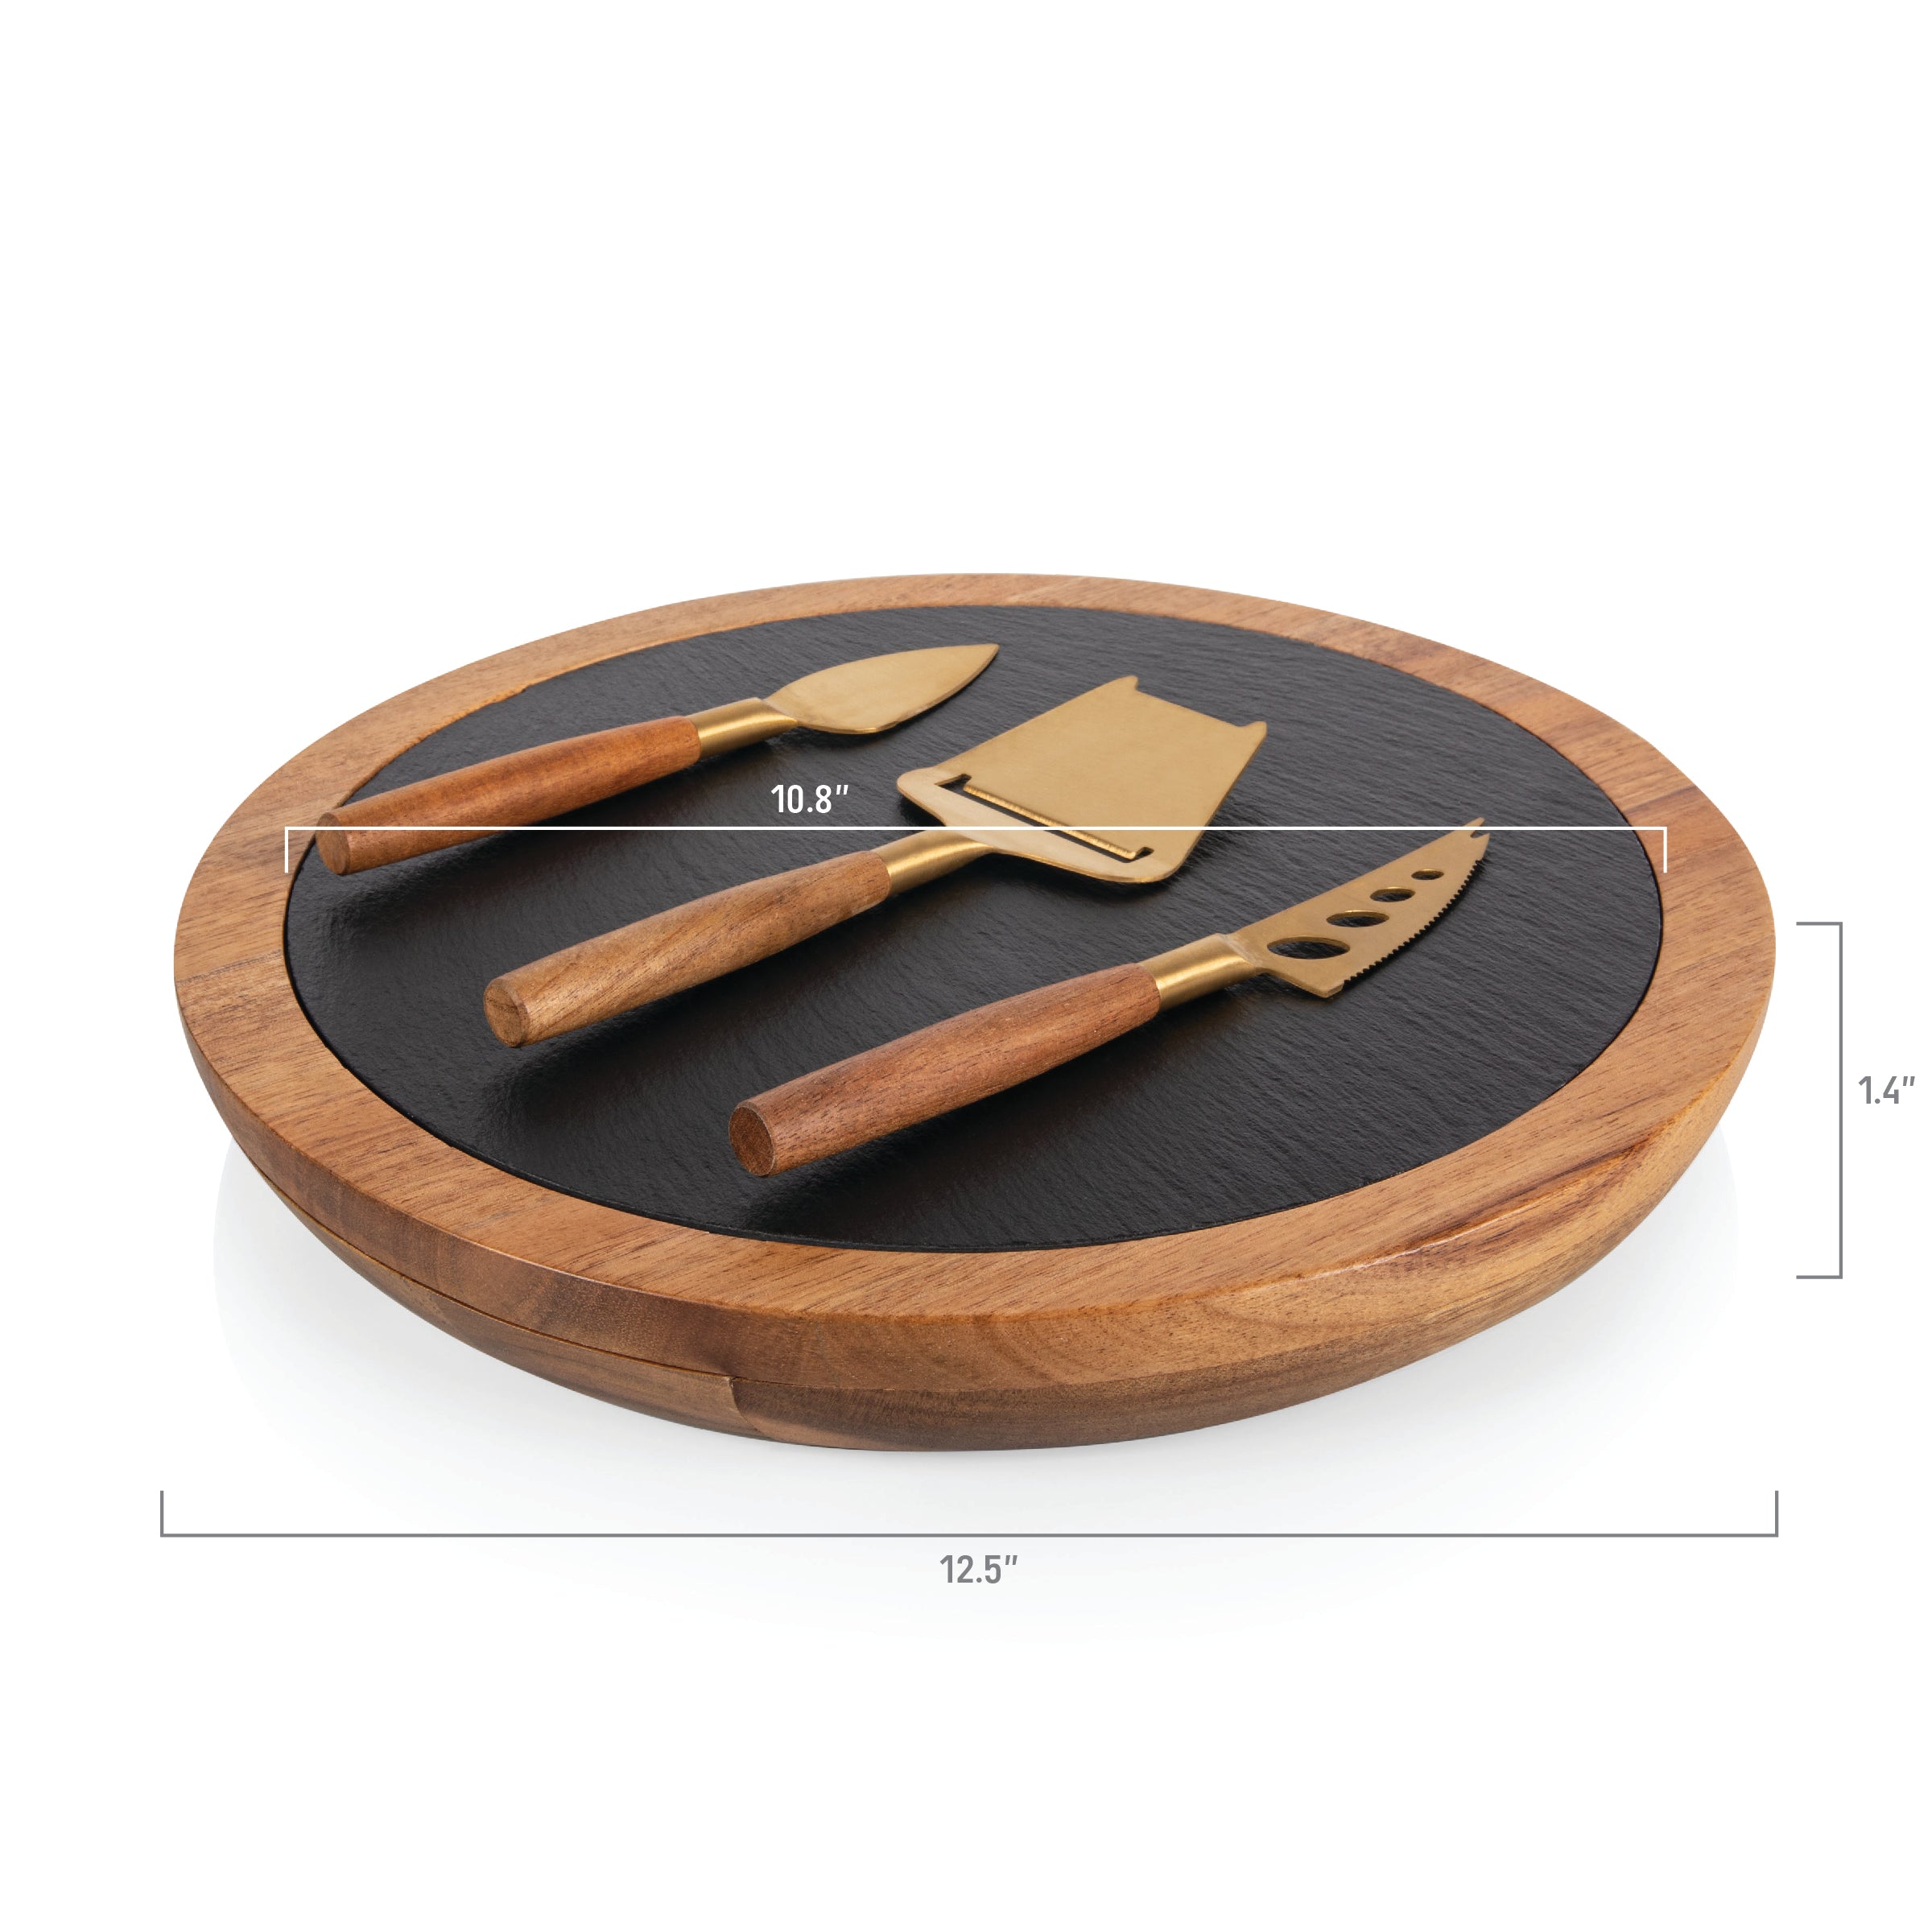 Tampa Bay Buccaneers - Insignia Acacia and Slate Serving Board with Cheese Tools